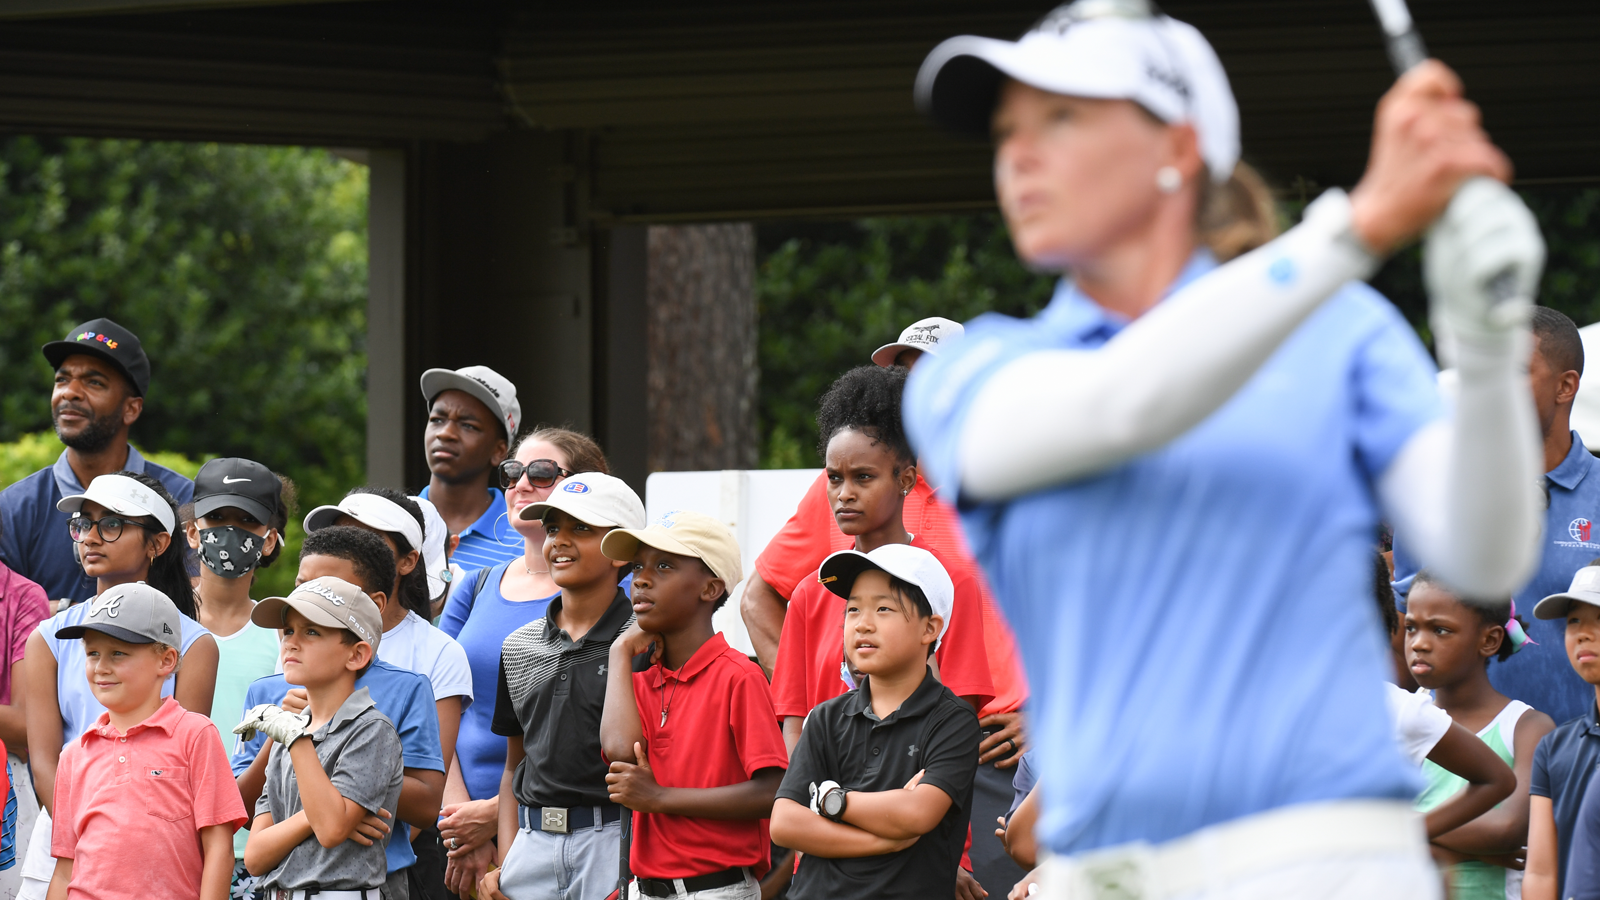 PGA of America Diversity, Equity and Inclusion